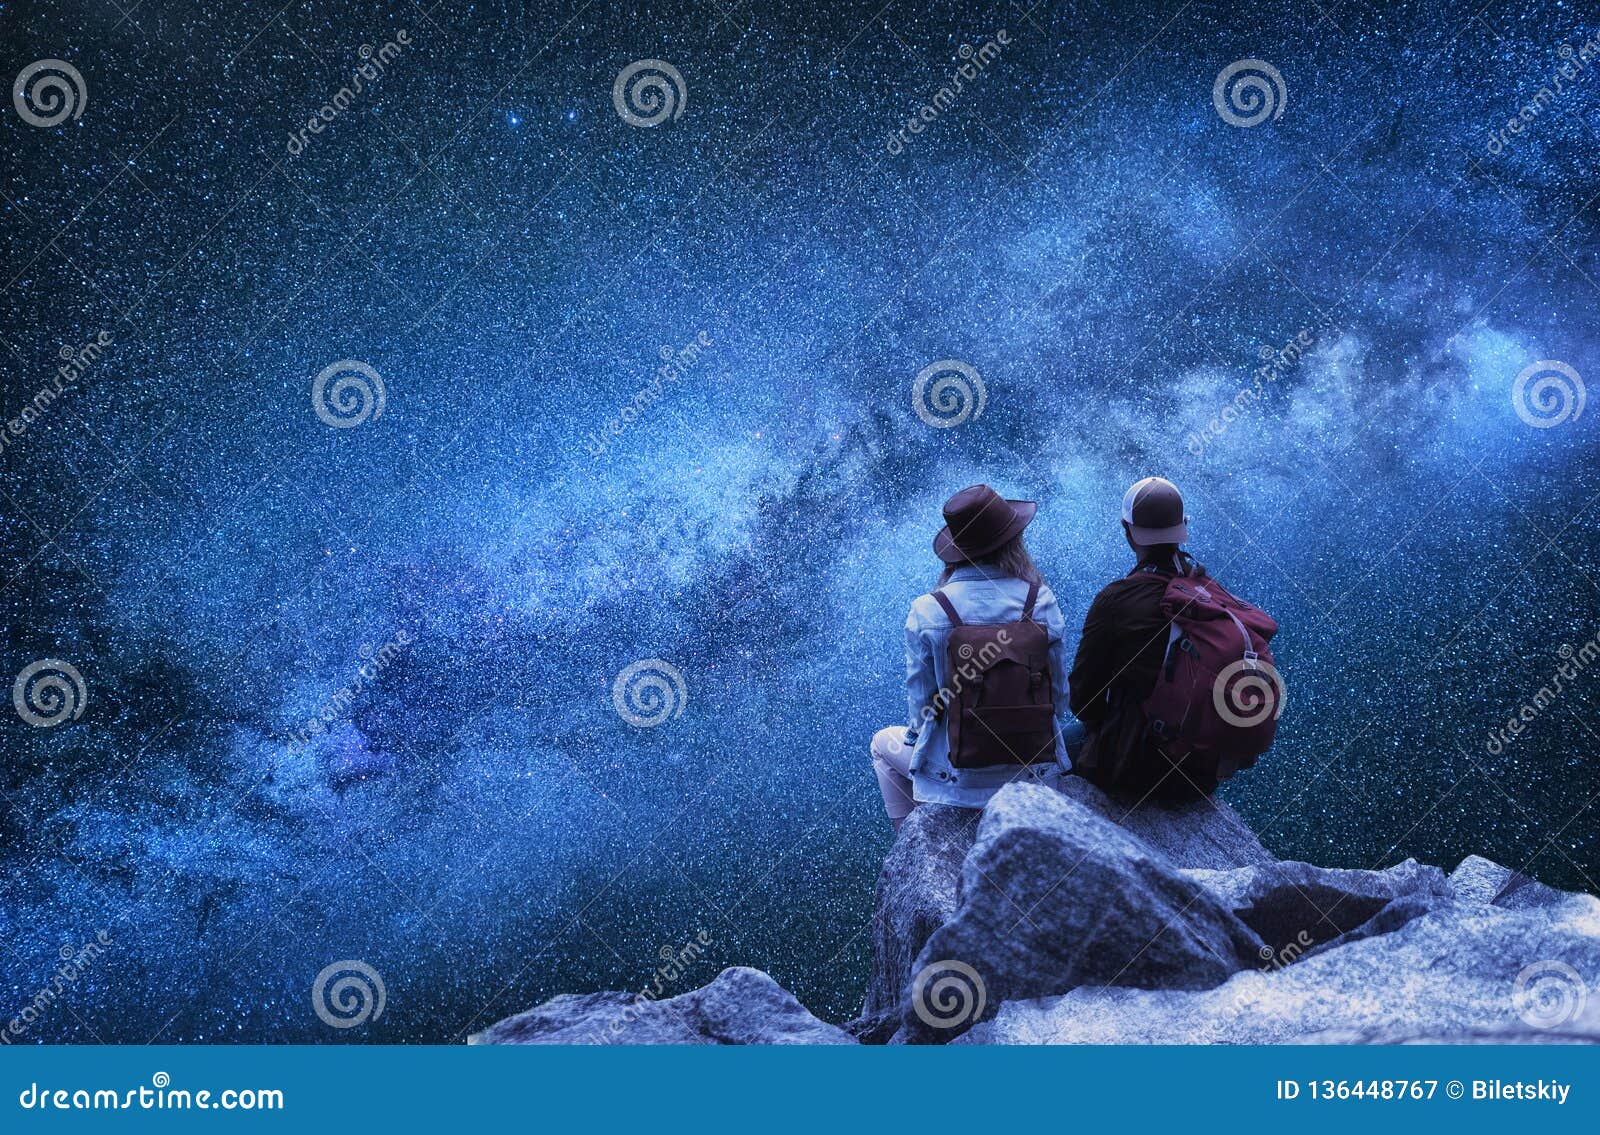 travelers couple look at the stars. travel and active life concept with team.